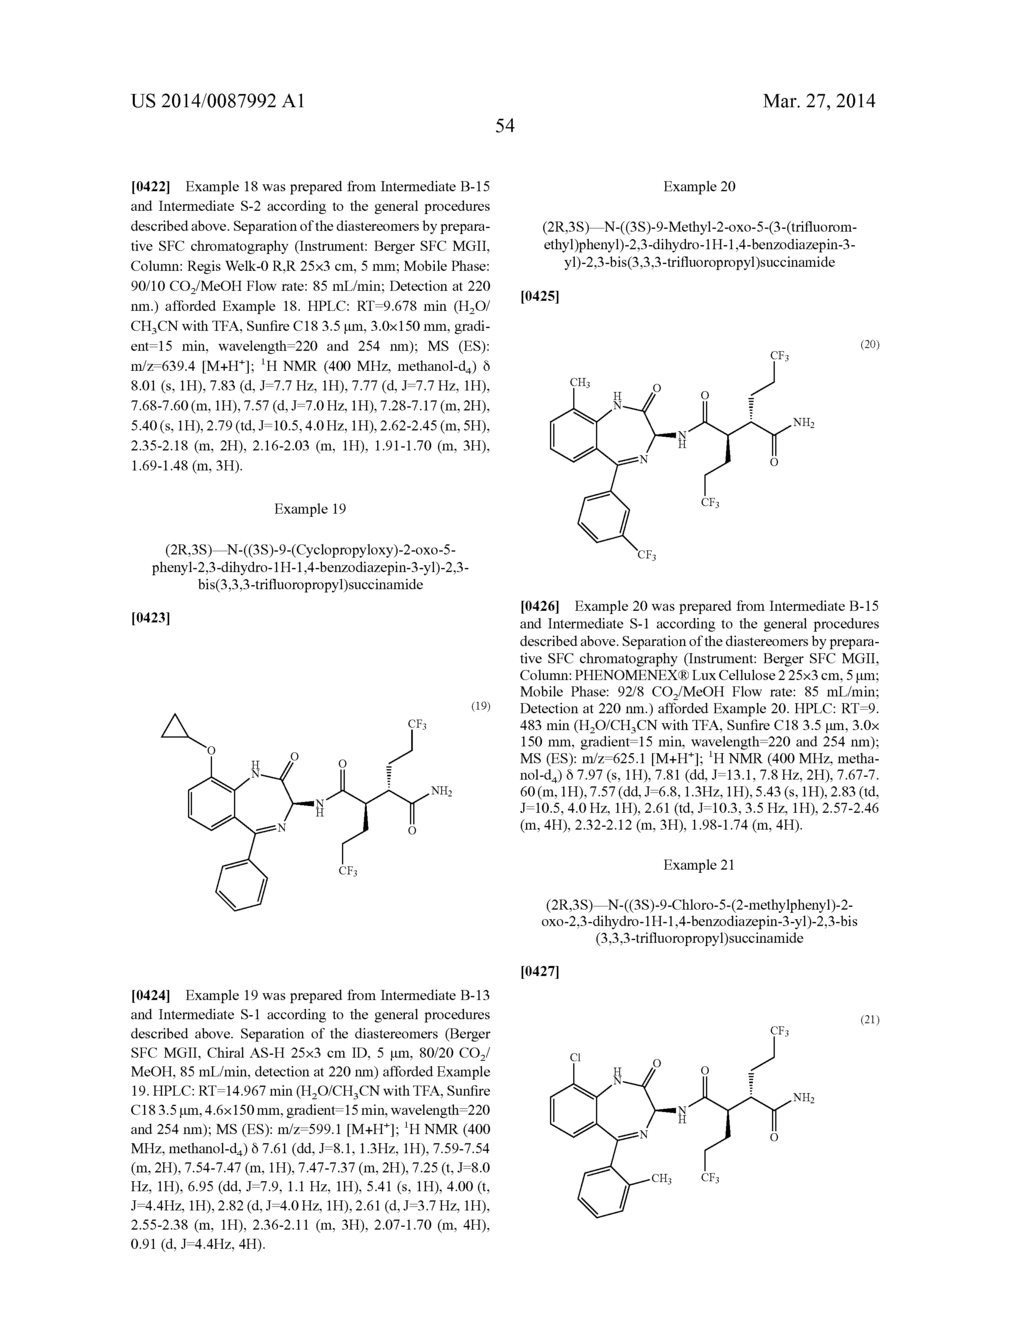 BIS(FLUOROALKYL)-1,4-BENZODIAZEPINONE COMPOUNDS AND PRODRUGS THEREOF - diagram, schematic, and image 61